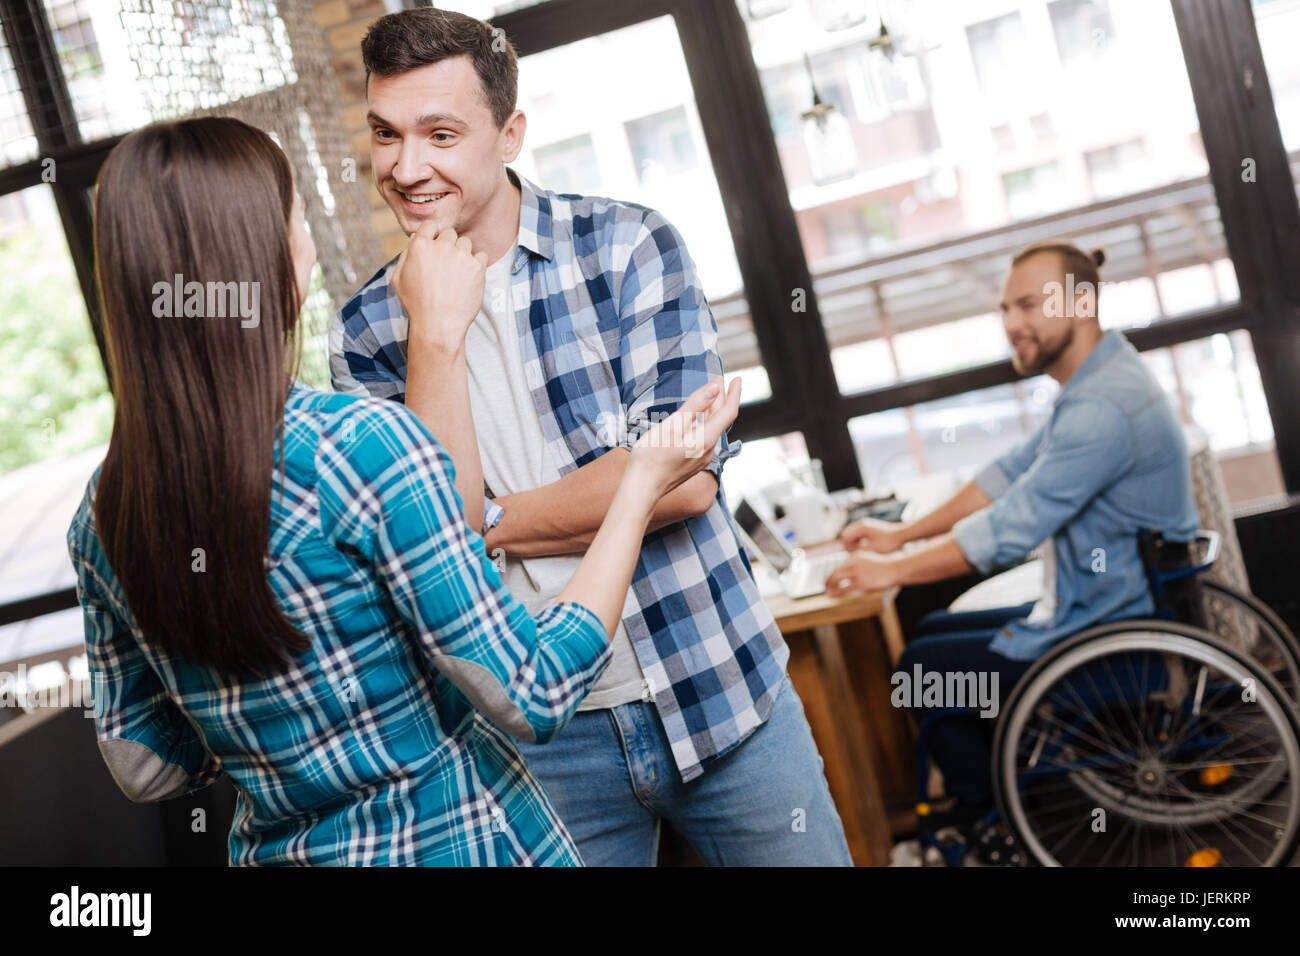 Positive talkative guy meeting his old friend Stock Photo